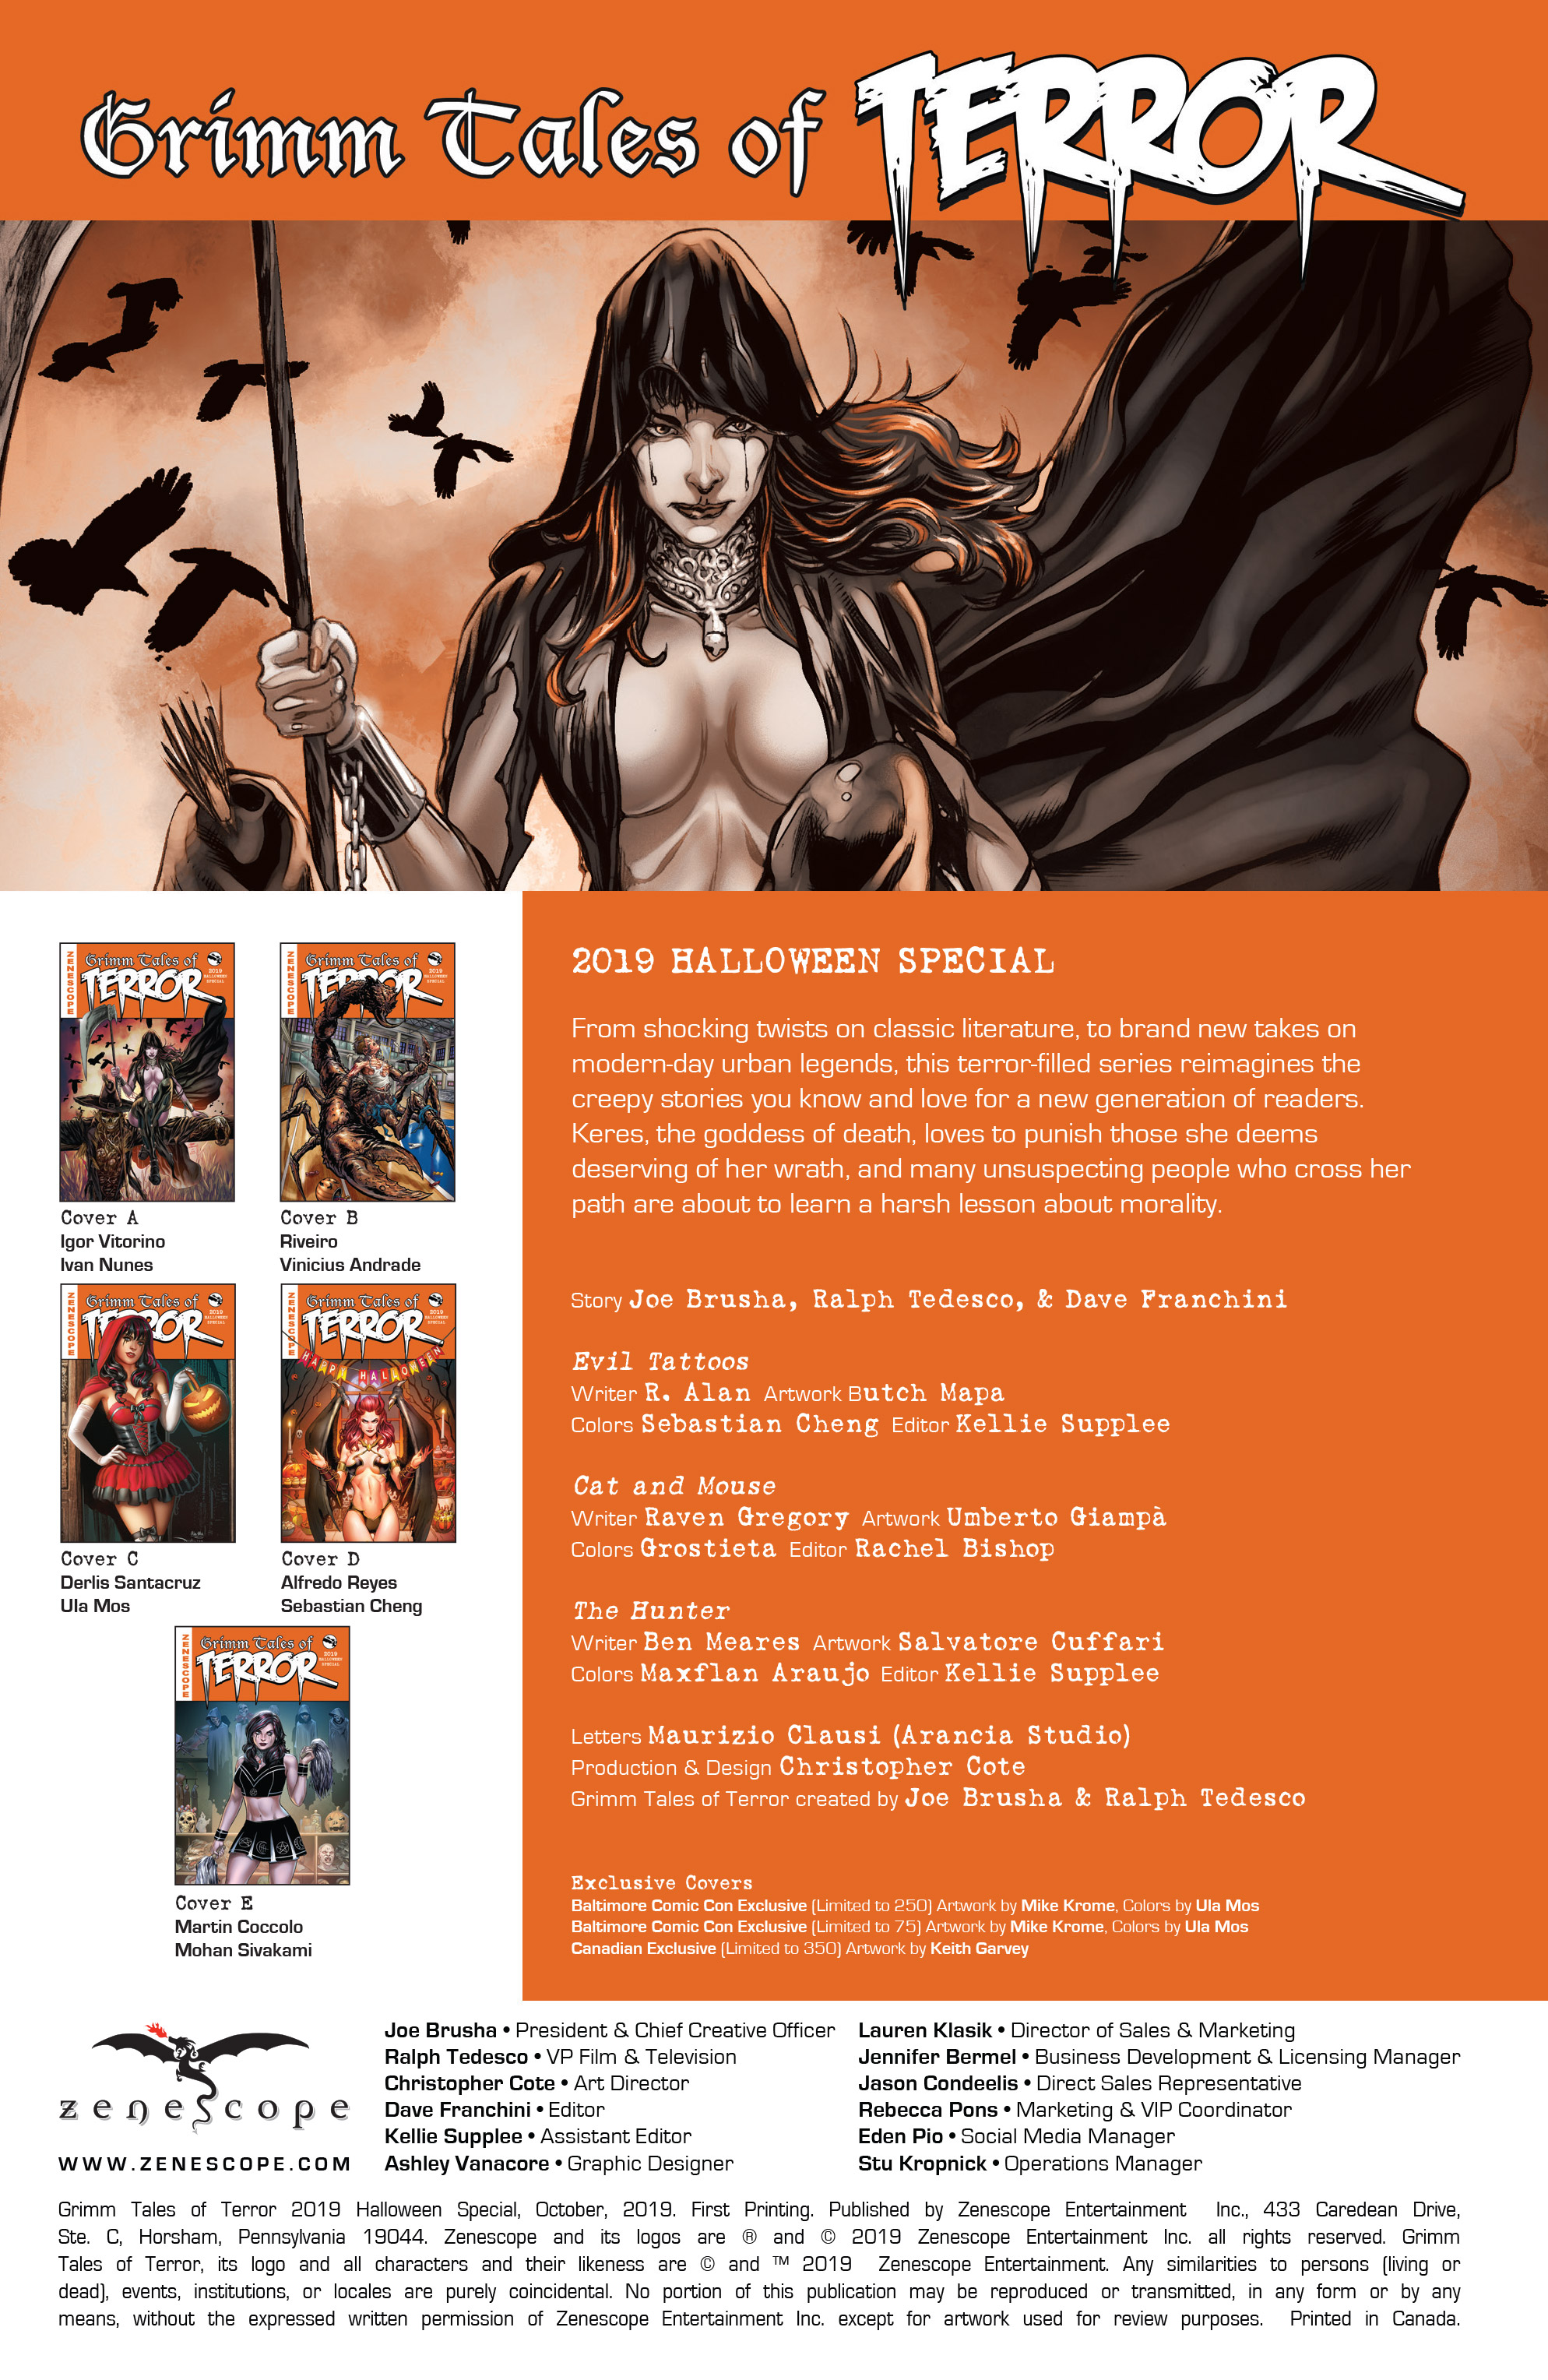 Read online Grimm Tales of Terror 2019 Halloween Special comic -  Issue # Full - 2